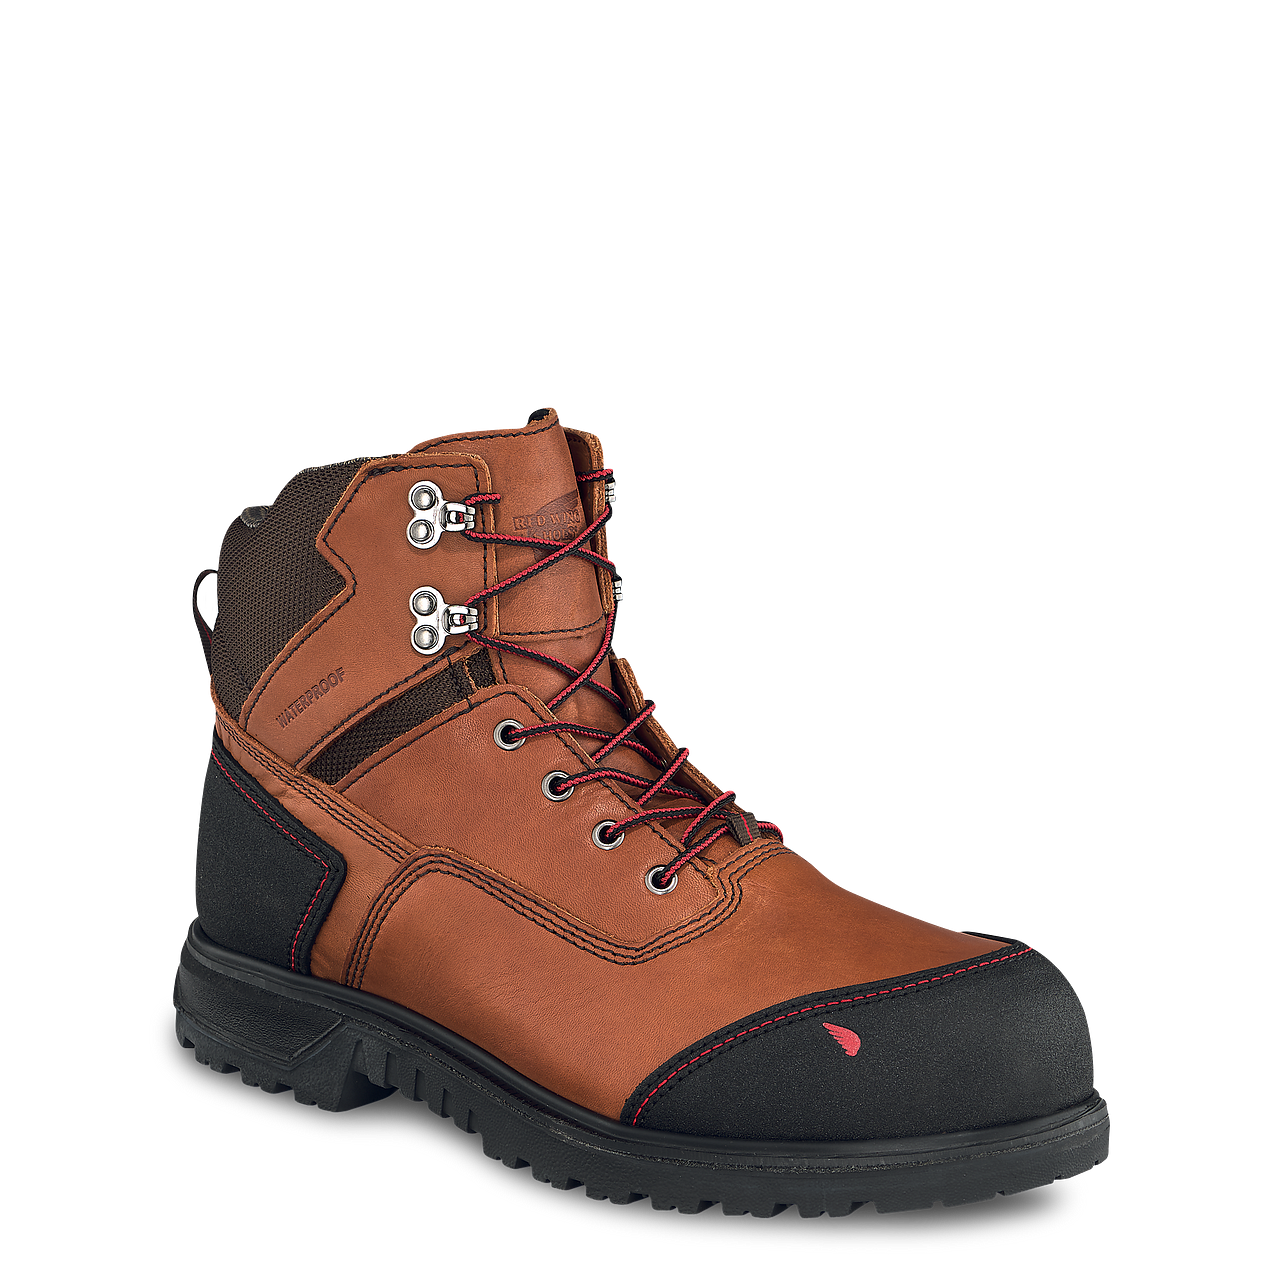 Red Wing 2403 BRNR XP 6-Inch Waterproof Safety Toe Boot